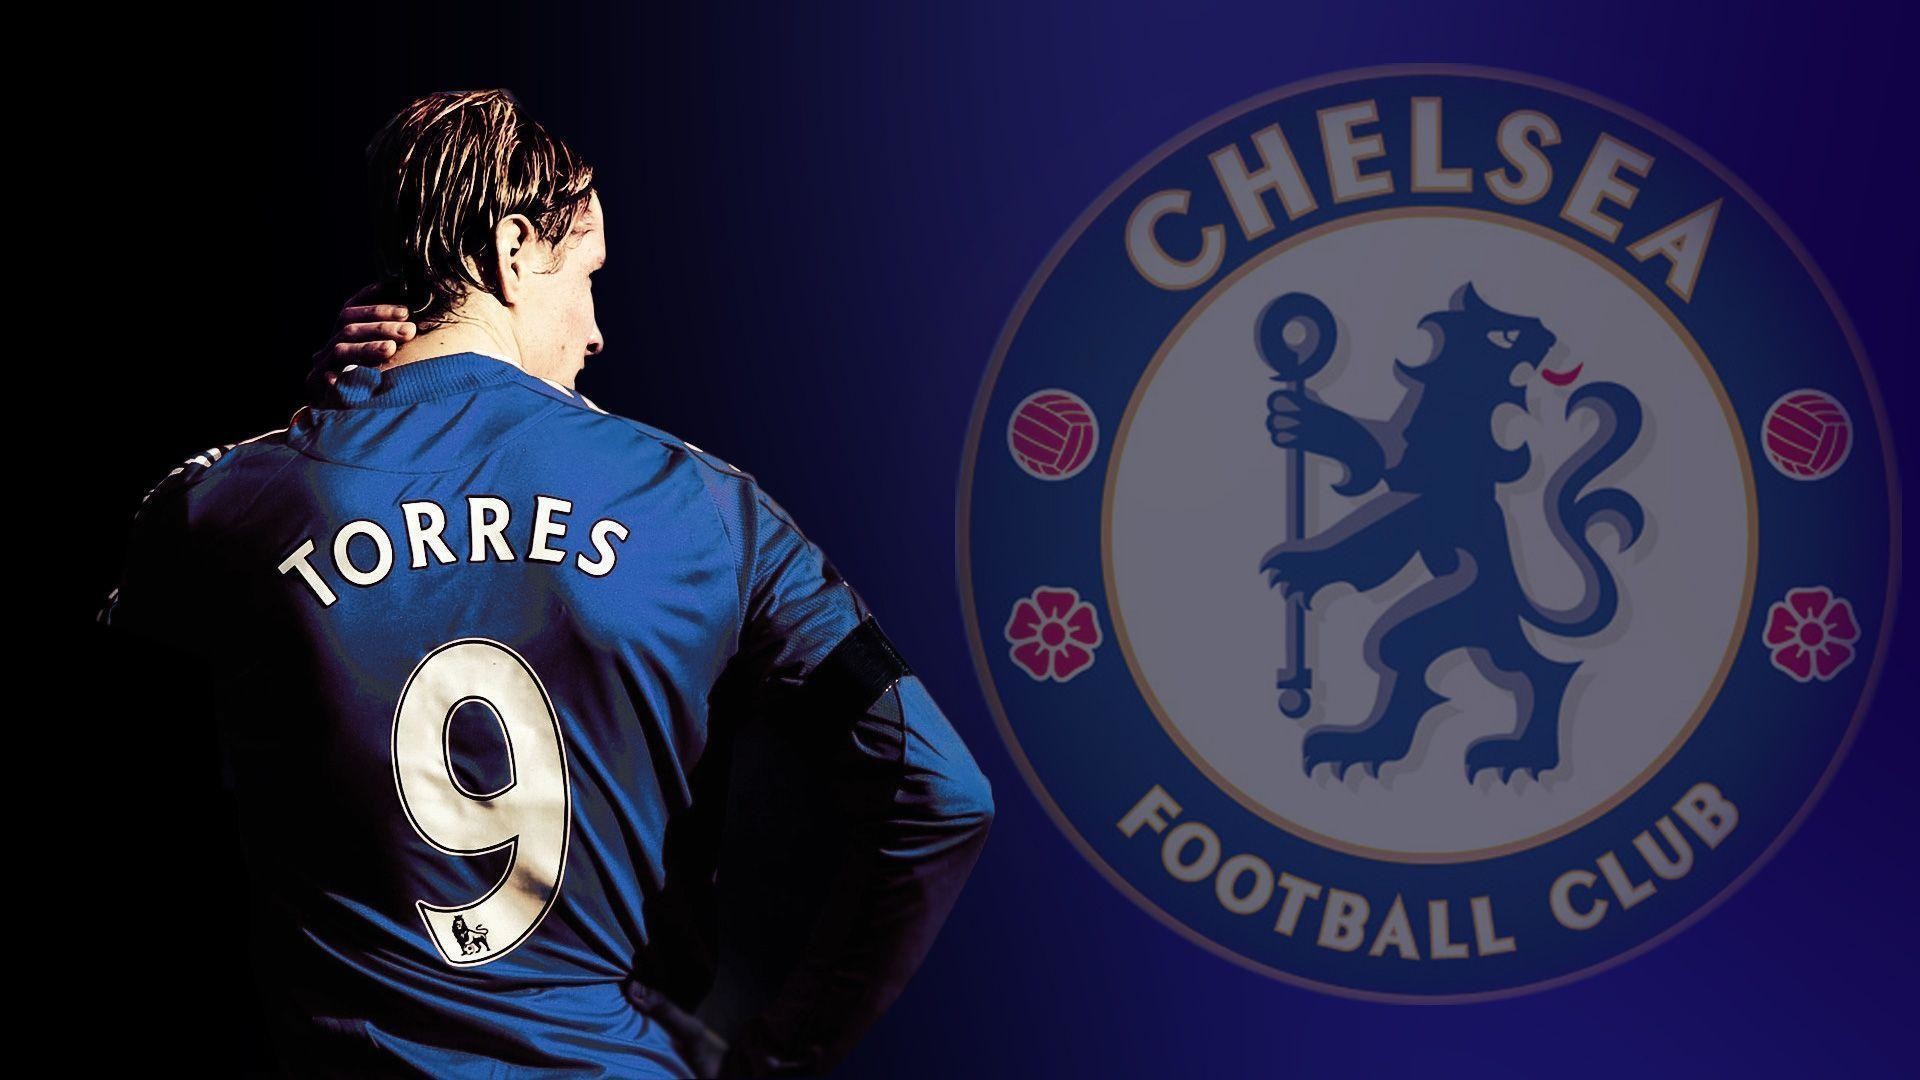 1920x1080 Chelsea HD Wallpapers | Chelsea Soccer Pictures | Cool Wallpapers